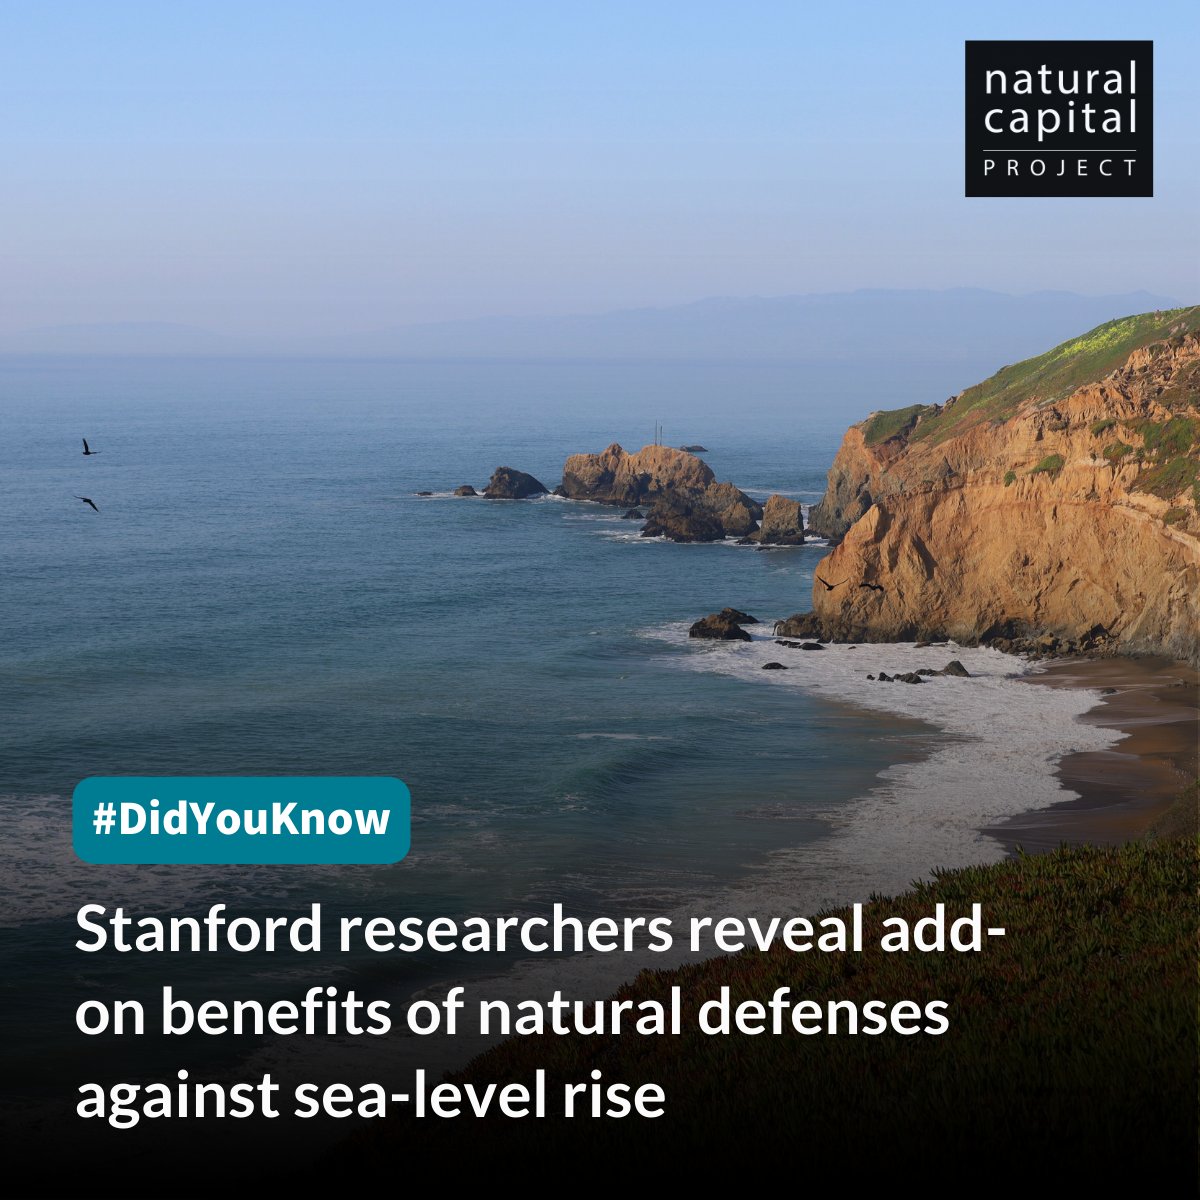 #DidYouKnow nature-based solutions, like restoring beaches, can effectively protect against #SeaLevelRise while providing extra benefits? Researchers modeled how investing in environmental #Conservation can help San Mateo County adapt to rising seas: stanford.io/3LksbHl